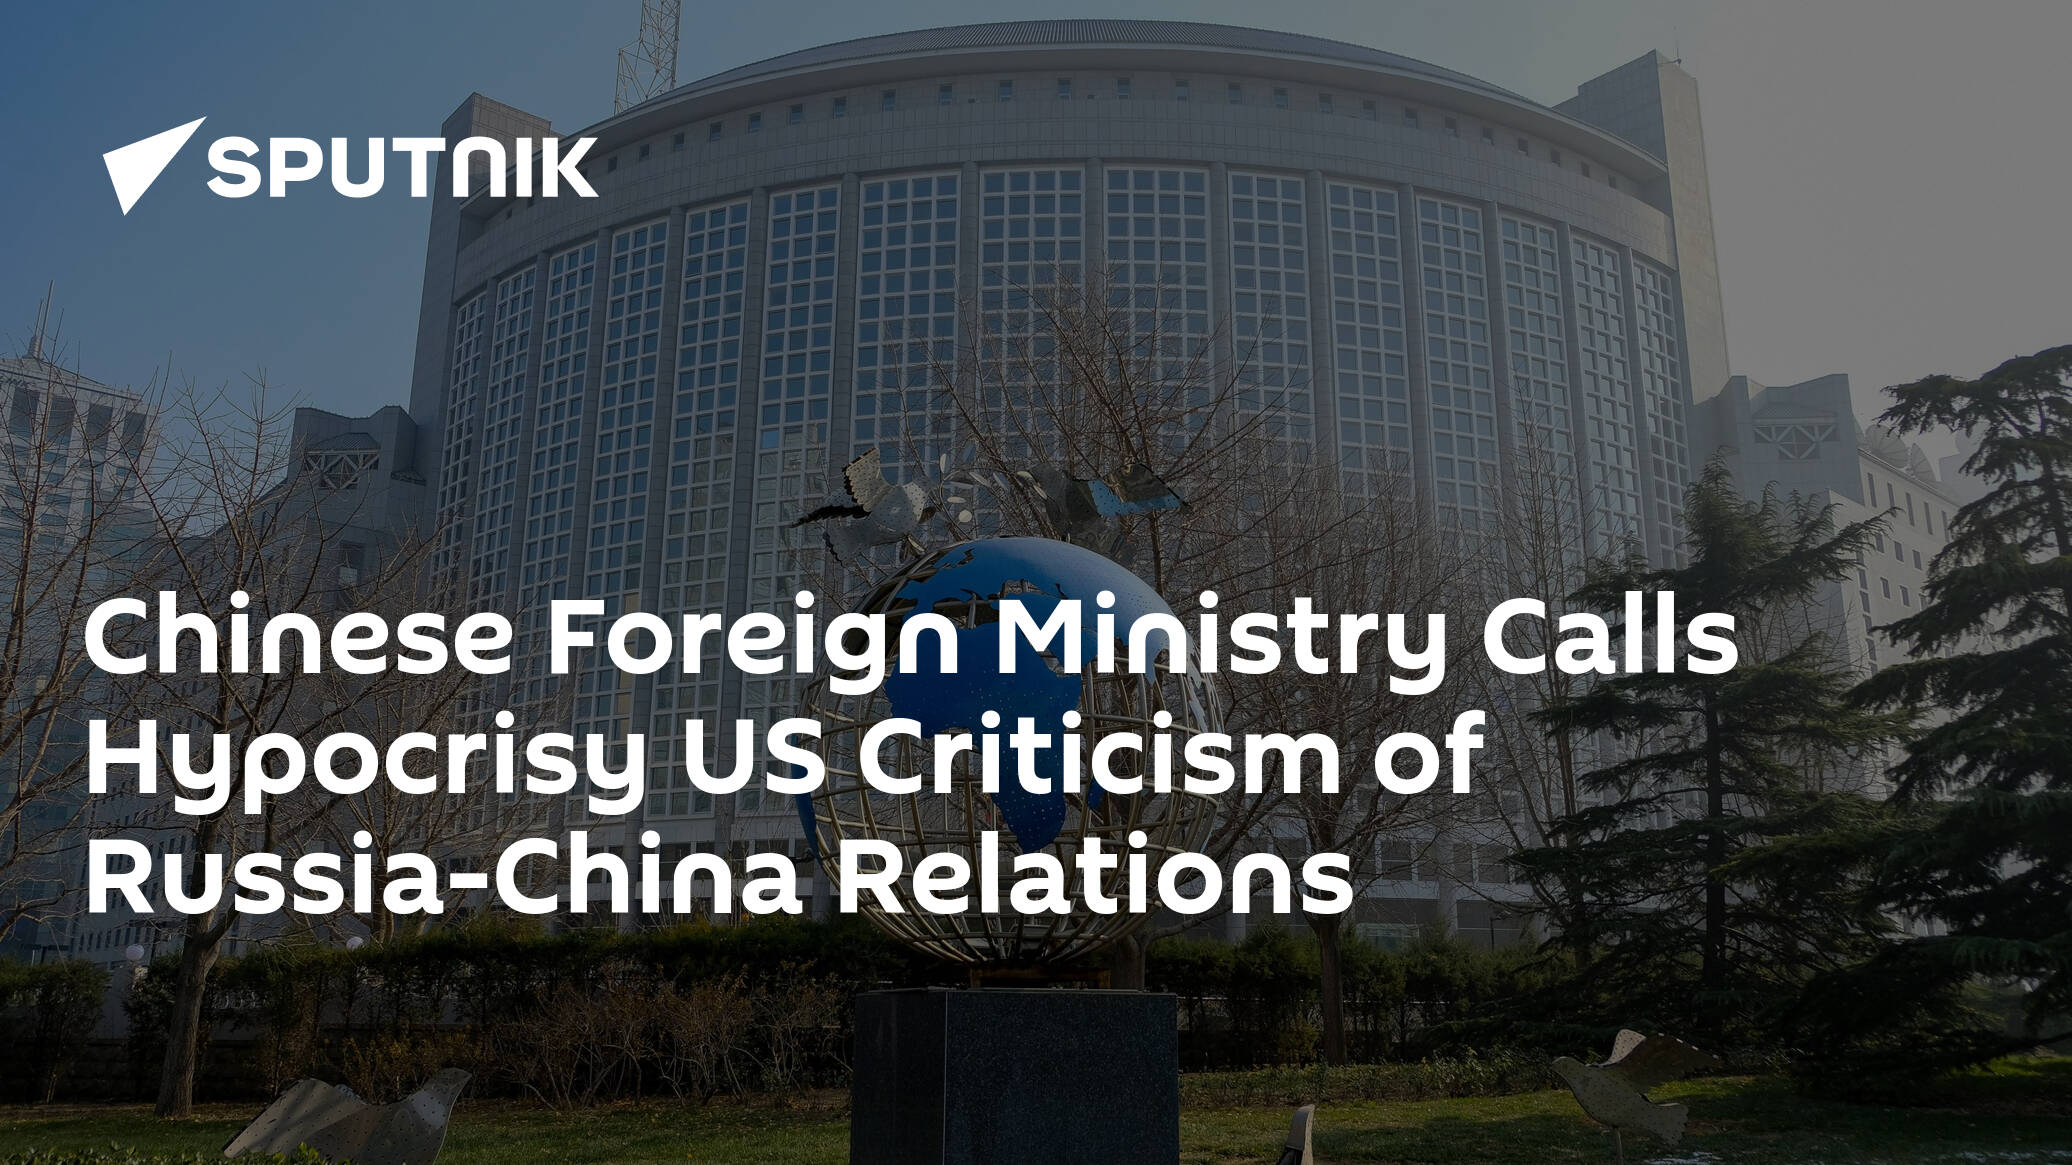 Chinese Foreign Ministry Calls Hypocrisy US Criticism of Russia-China Relations